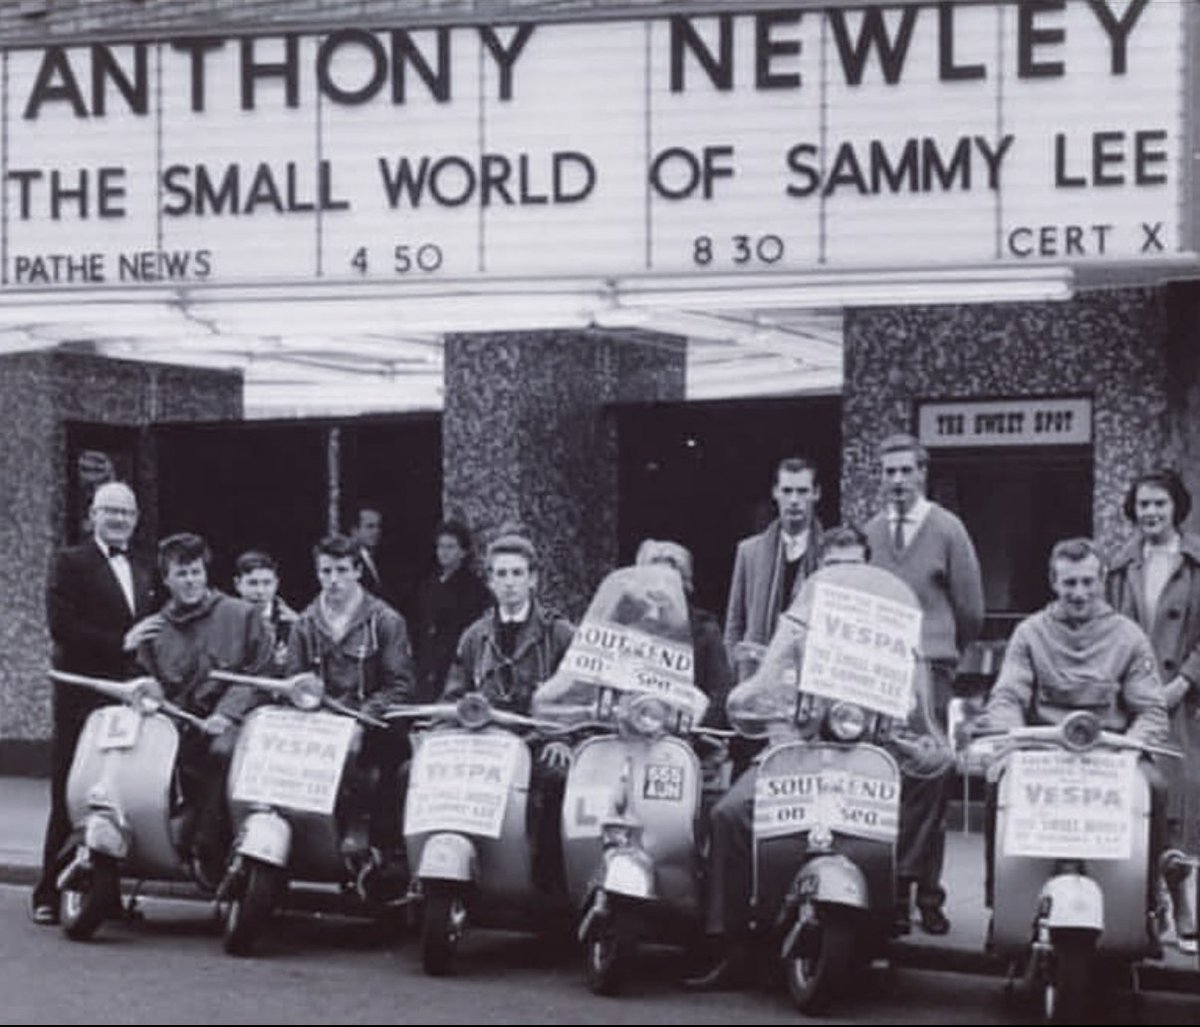 SAMMY AT 66 16 Apr A reading of the original script #Sammy the success of which became The Small World Of Sammy Lee. SAMMY was originally written & directed by #KenHughes & was the TV play that catapulted #AnthonyNewley into the limelight. thecockpit.org.uk/show/sammy_at_… #theatre